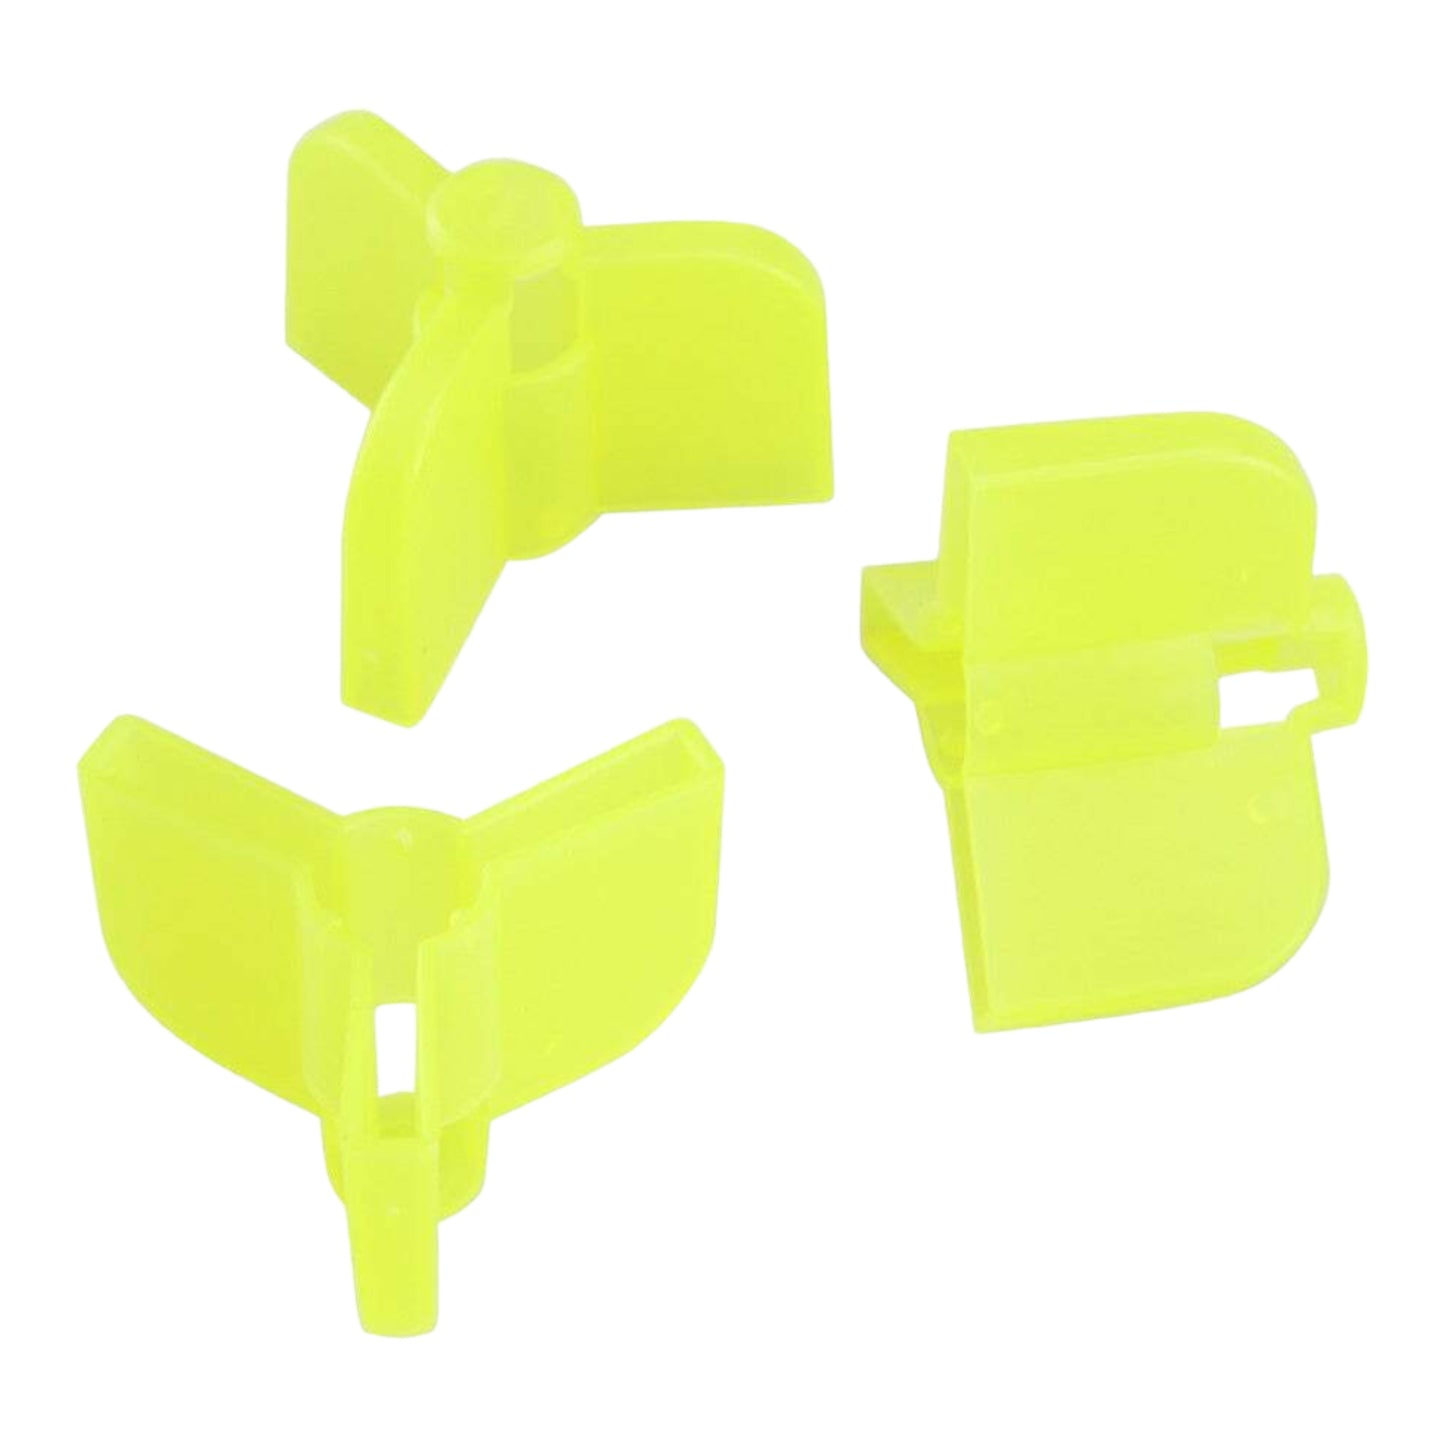 Owner Treble Hook Safety Caps / Protective Covers for Trebles